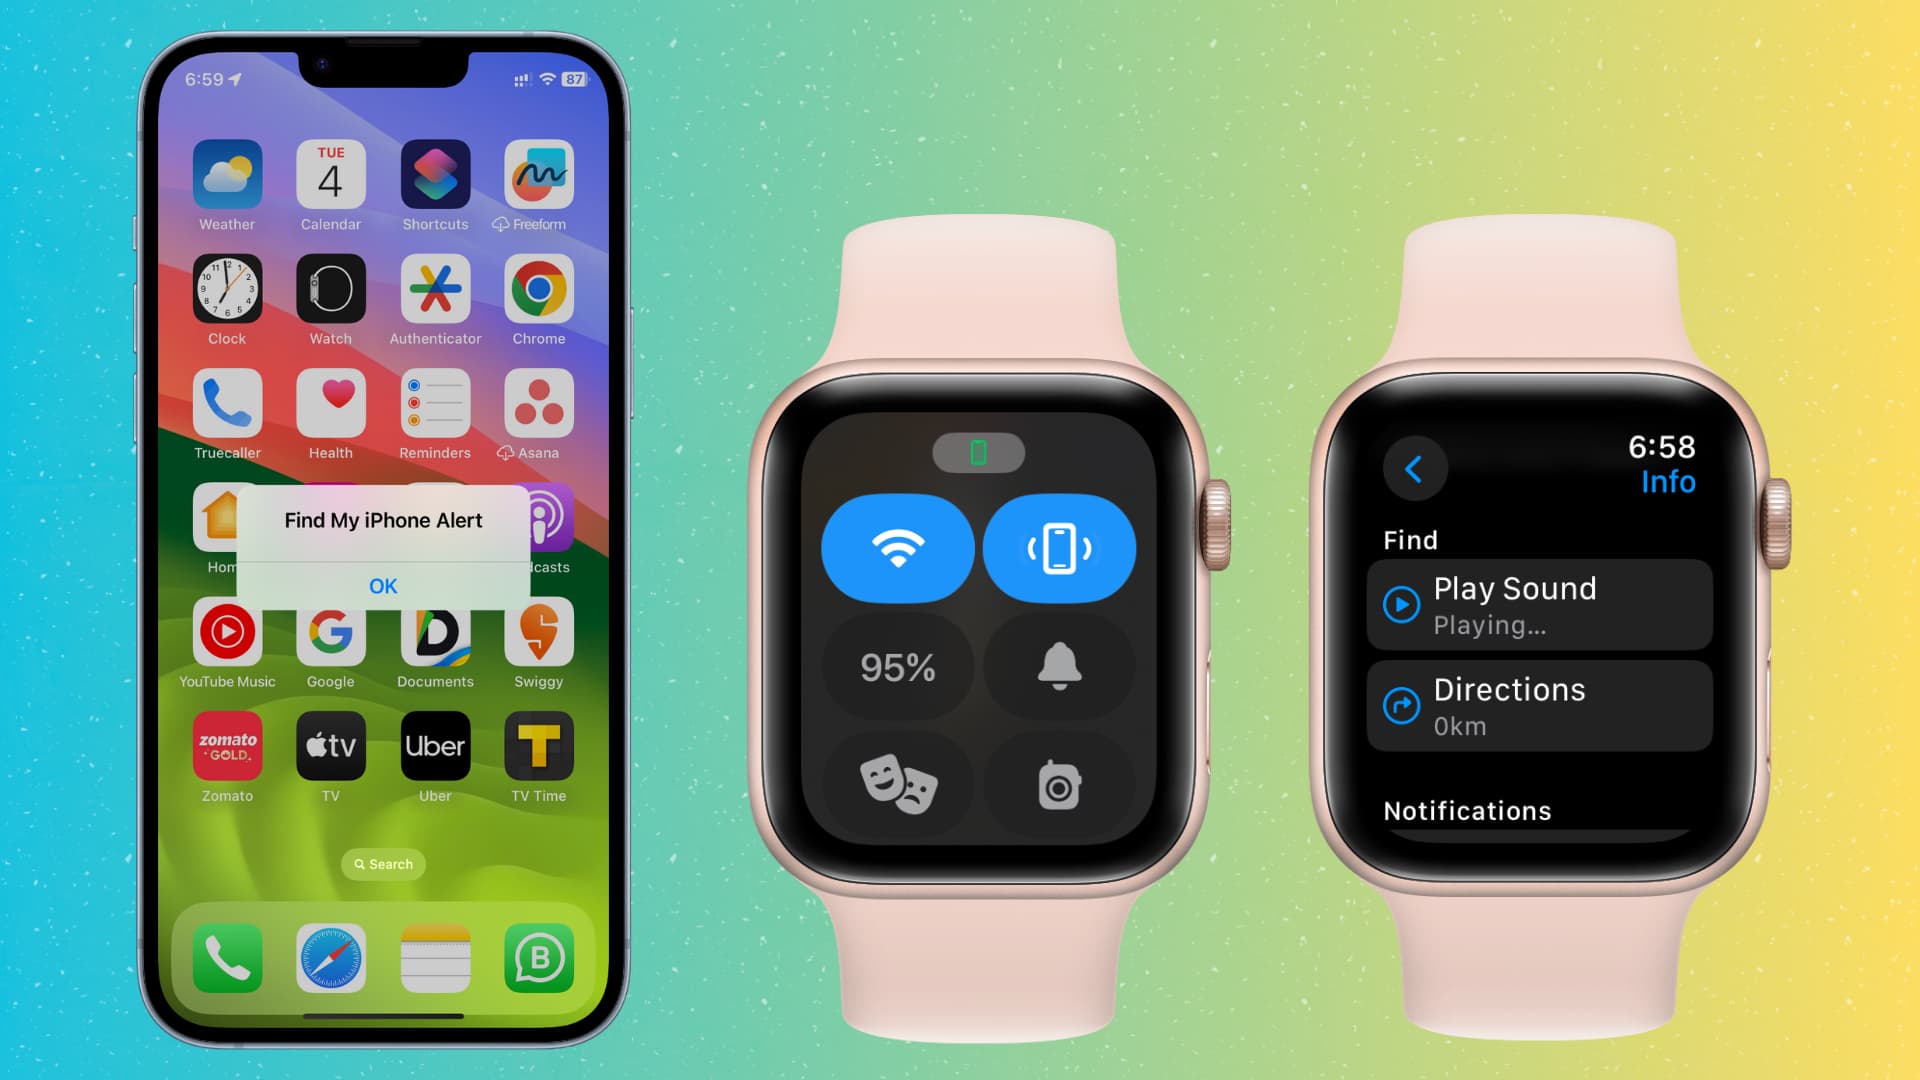 Locate your missing iPhone using your Apple Watch